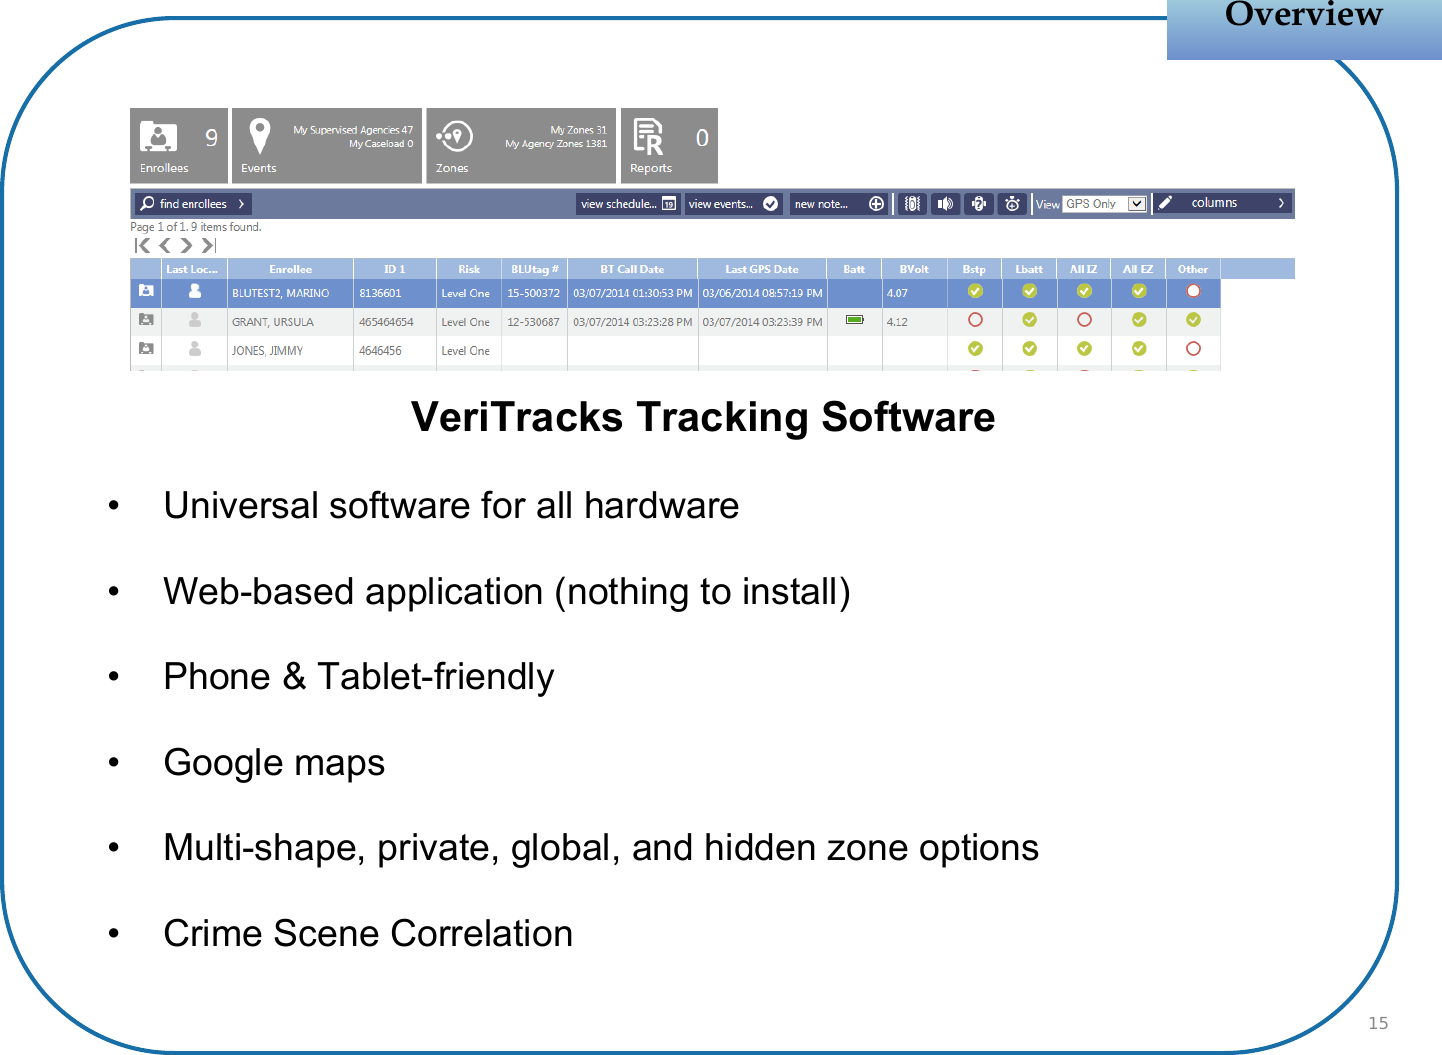 VeriTracks Tracking Software• Universal software for all hardware• Web-based application (nothing to install)• Phone &amp; Tablet-friendly• Google maps• Multi-shape, private, global, and hidden zone options• Crime Scene CorrelationOverviewOverview15